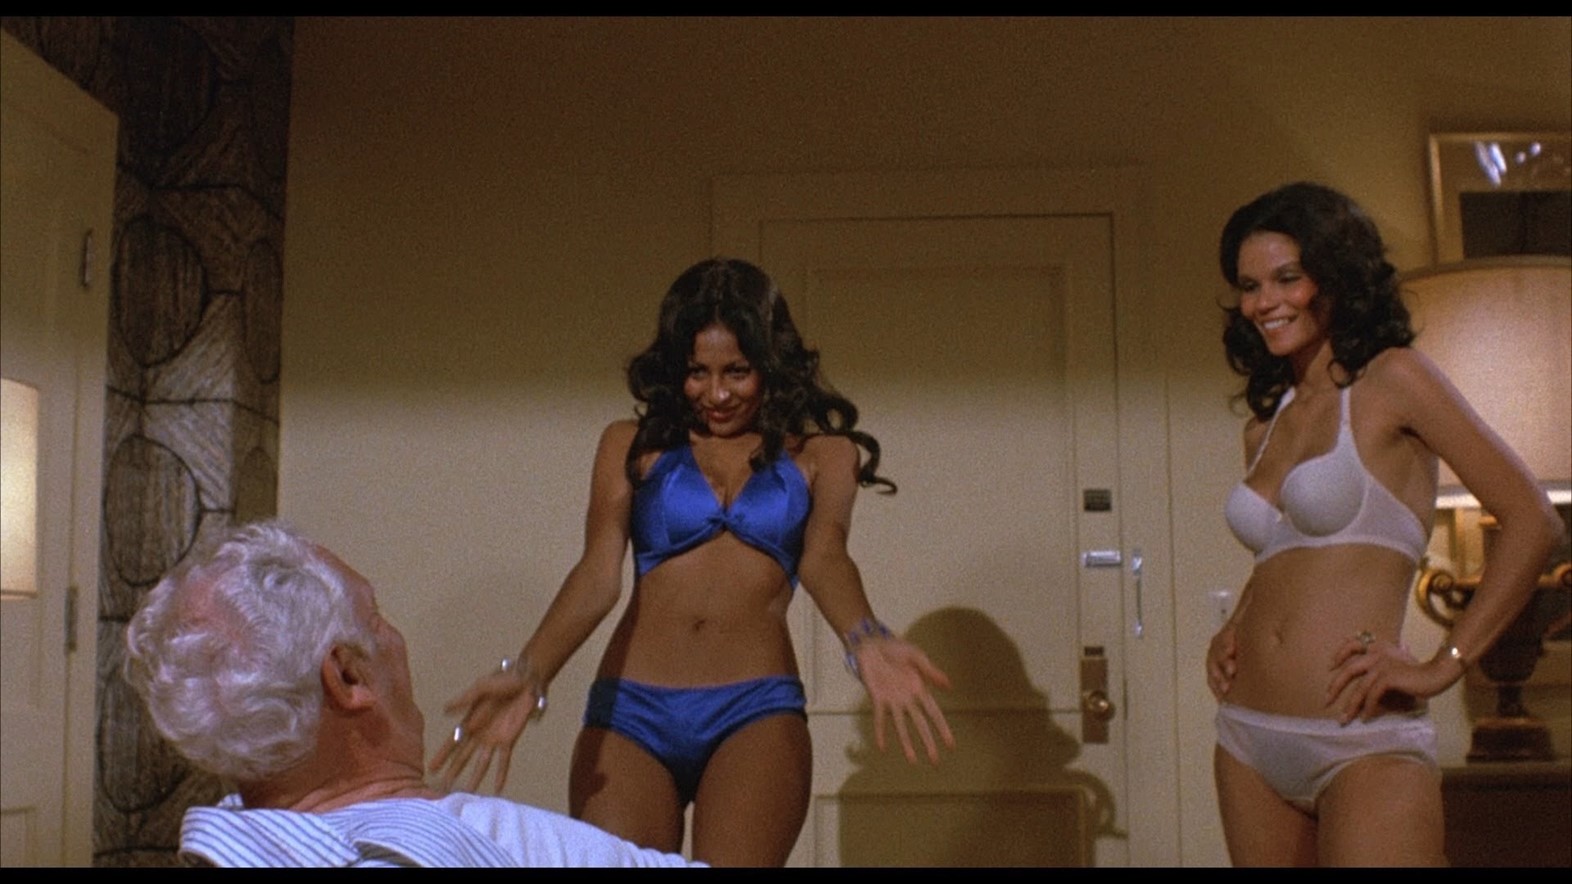 The Ten Most Iconic Lingerie Moments On Film